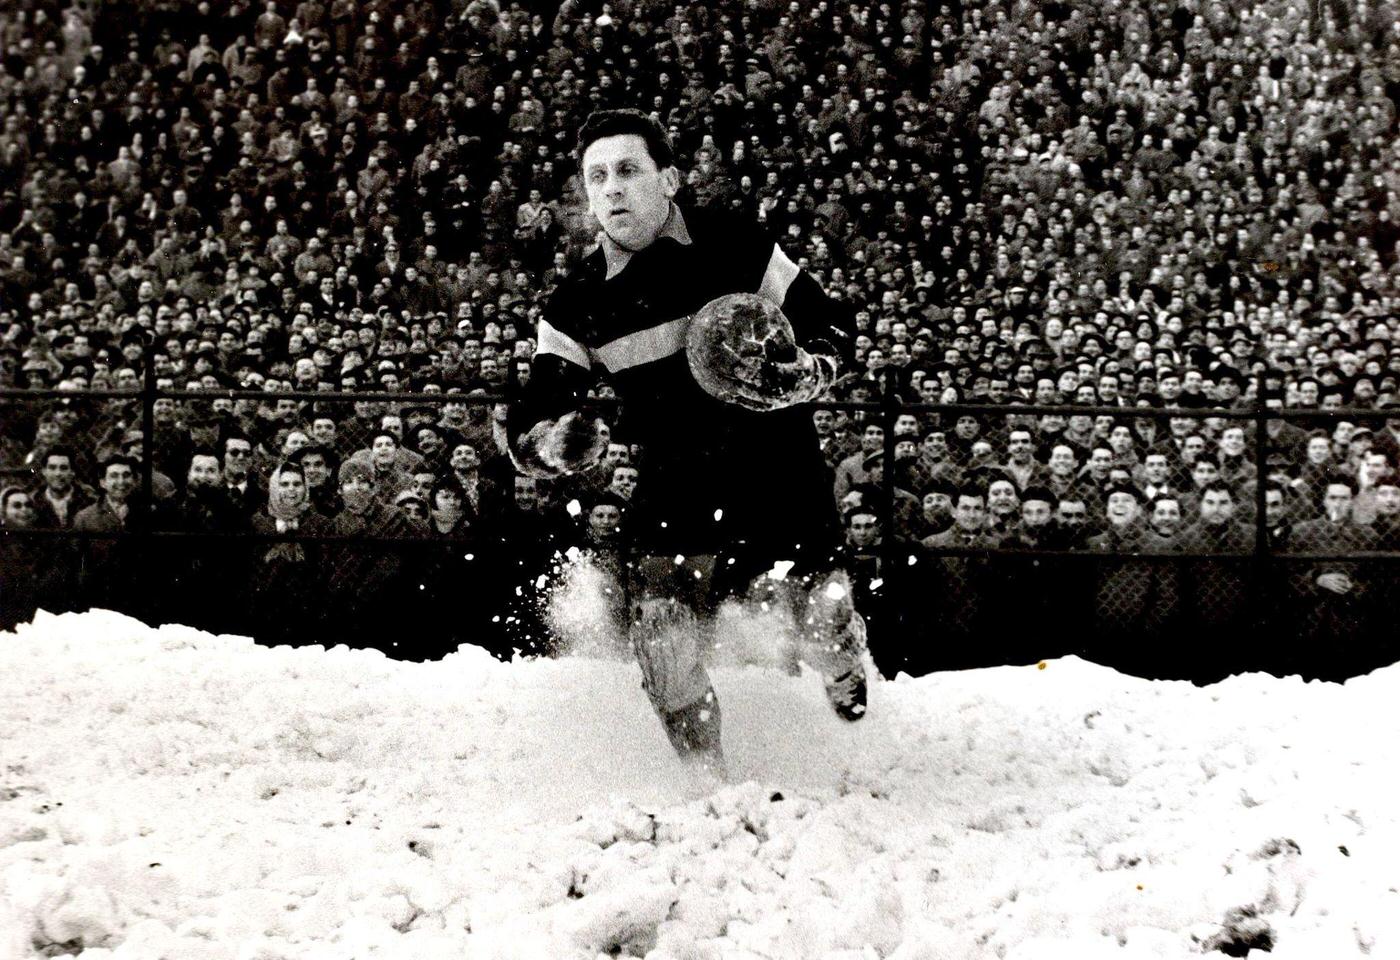 Italy v France, A picture of the French goalkeeper Remetter as he retrieves the ball from the snow behind his goal